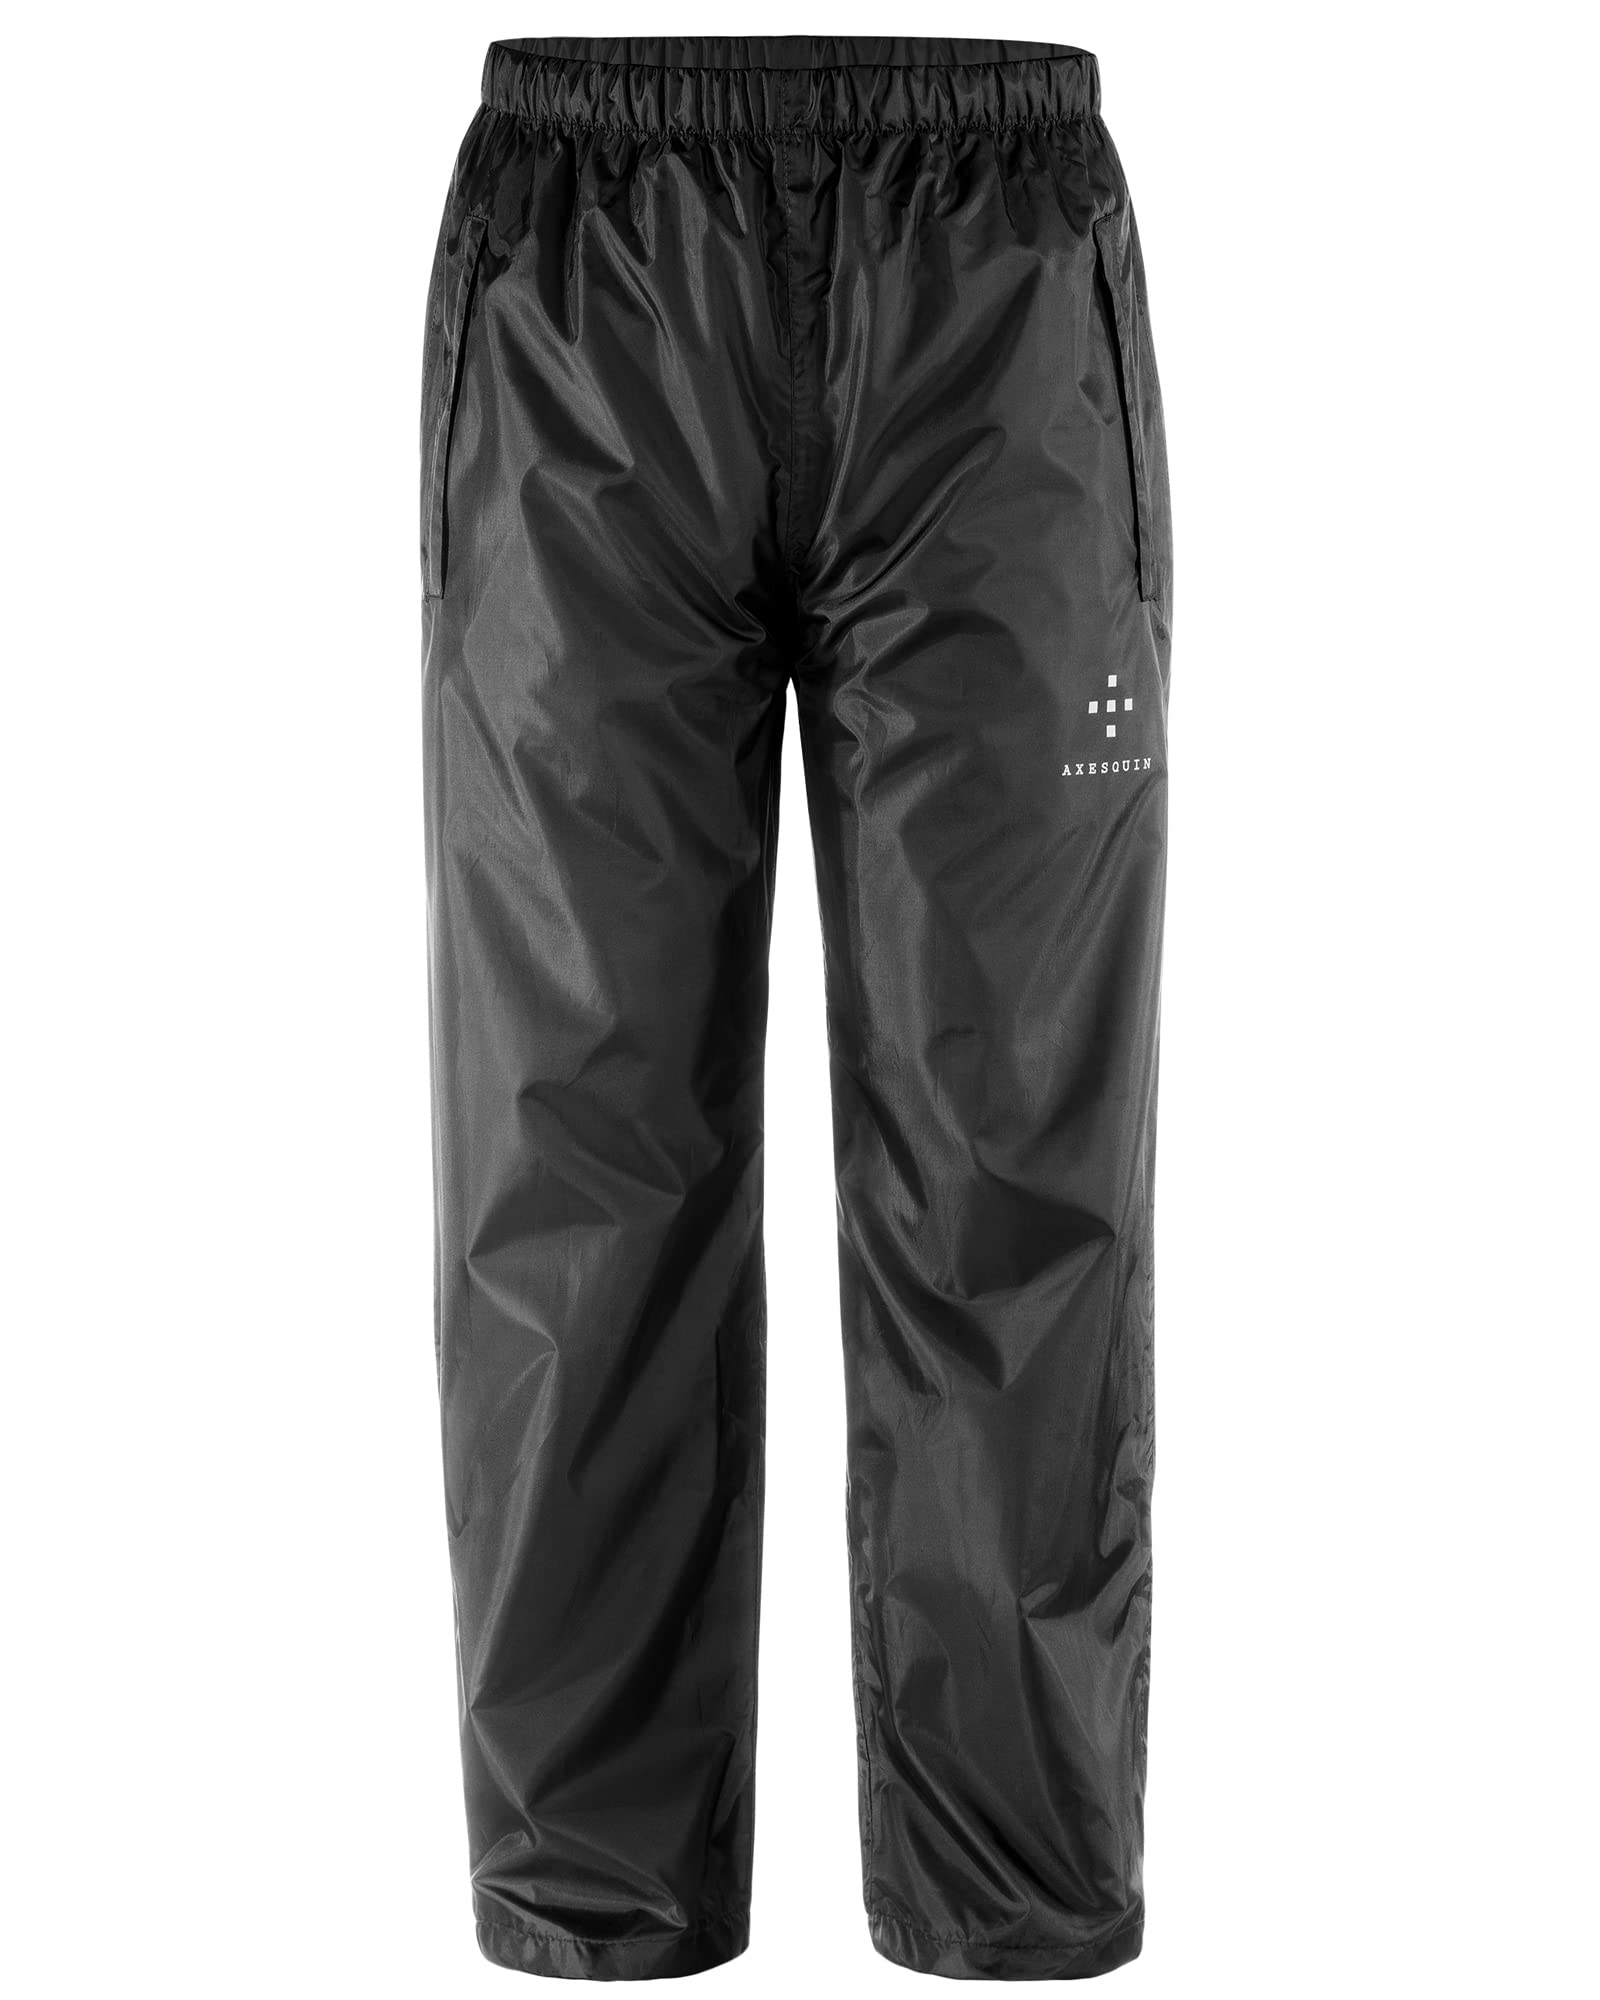 REDCAMP Unisex Rain Pants Waterproof Lightweight with Side Zipper, PU5000mm  Great for Hiking Outdoor, Black M : Amazon.in: Clothing & Accessories